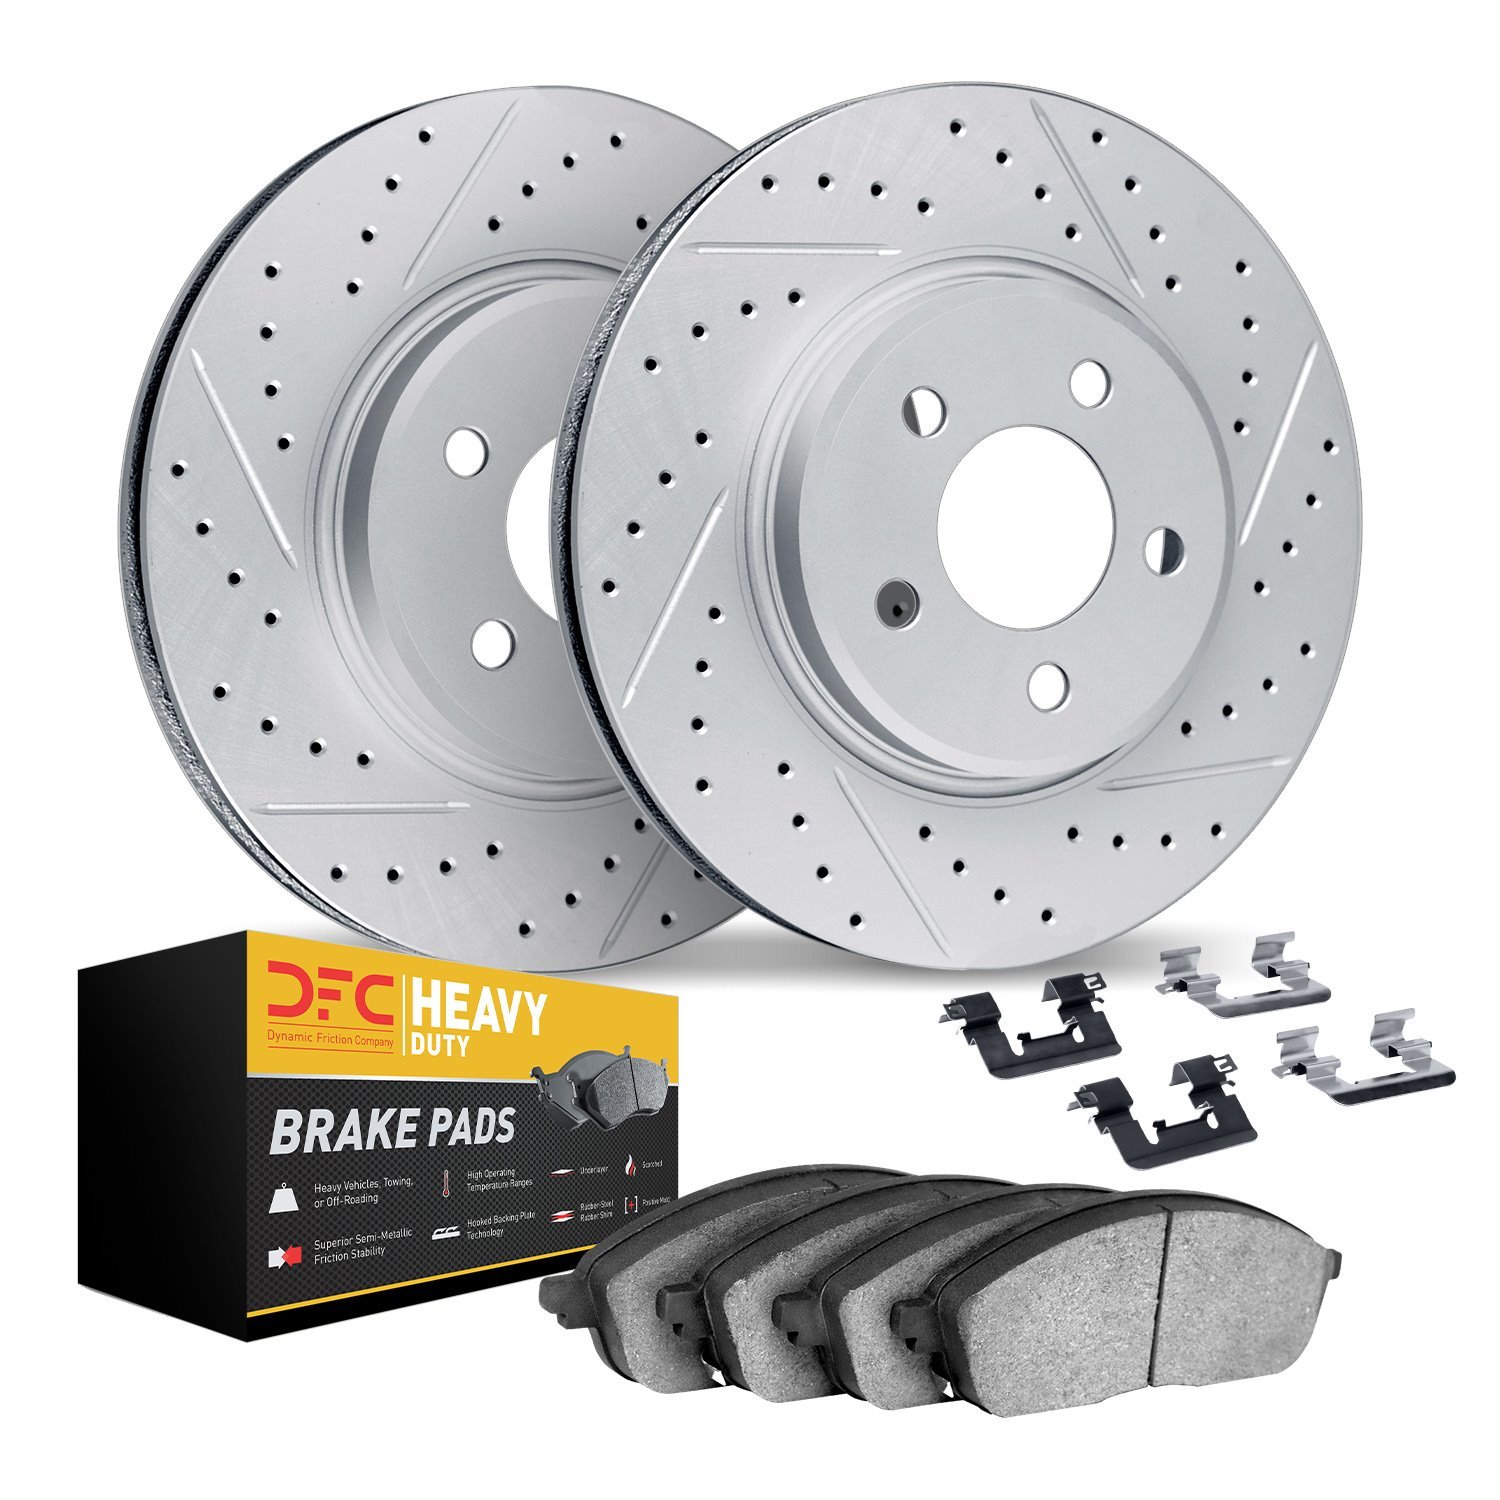 2212-48001 Geoperformance Drilled/Slotted Rotors w/Heavy-Duty Pads Kit & Hardware, 1997-2005 GM, Position: Rear